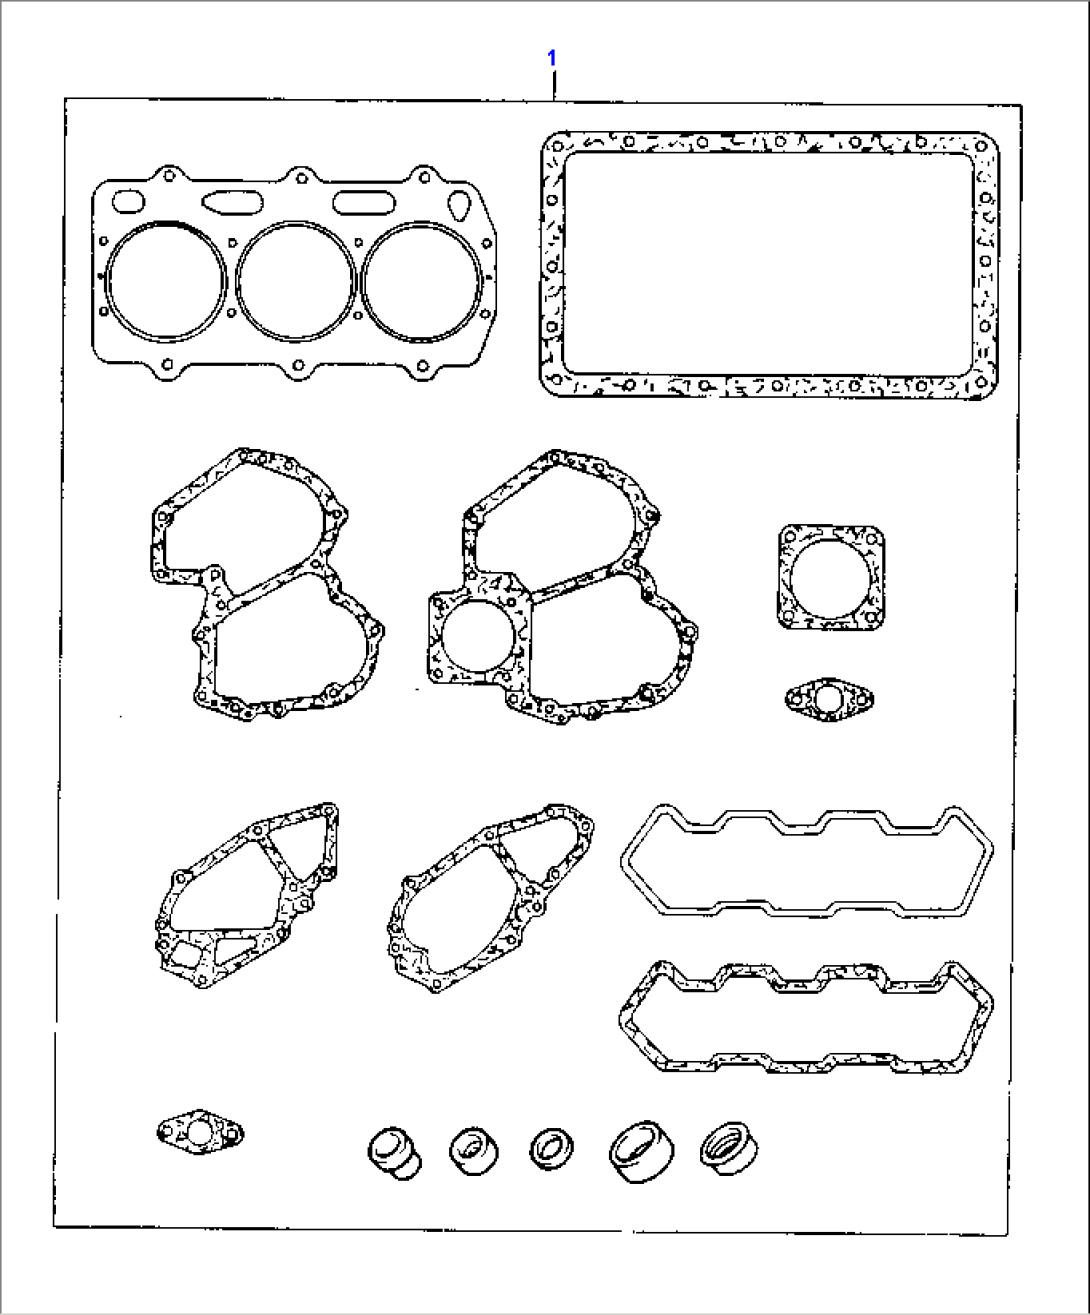 JOINTS AND GASKET - COMPLETE SERVICE KIT